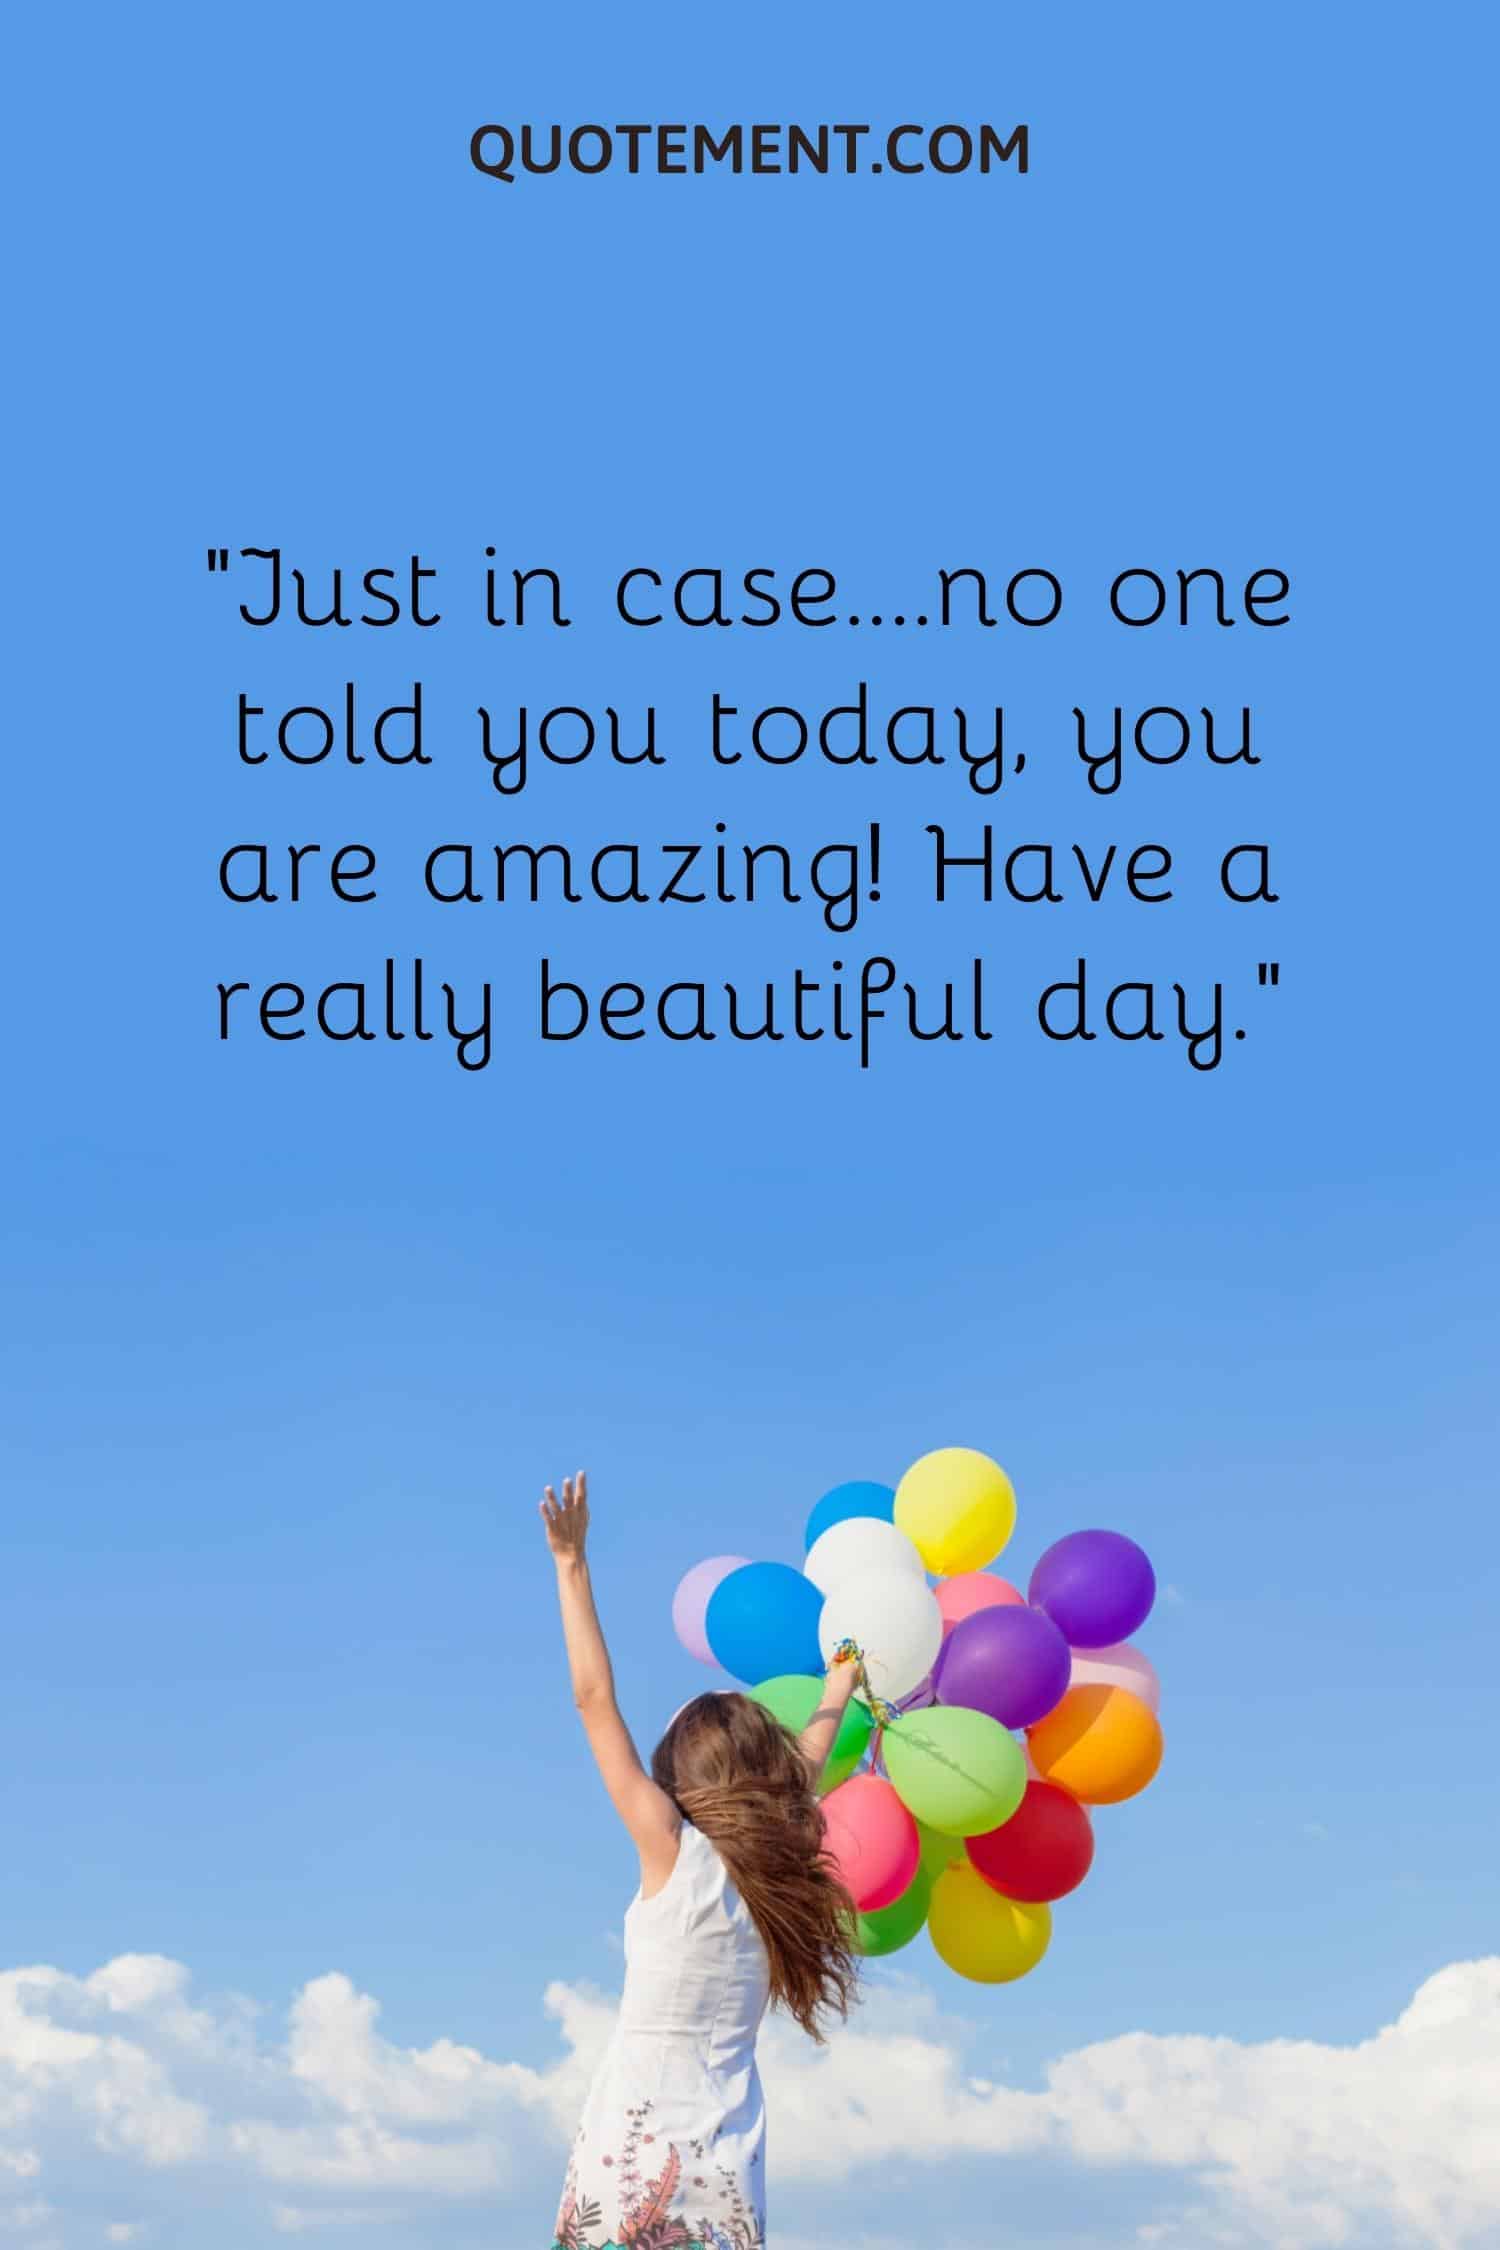 Just in case….no one told you today, you are amazing